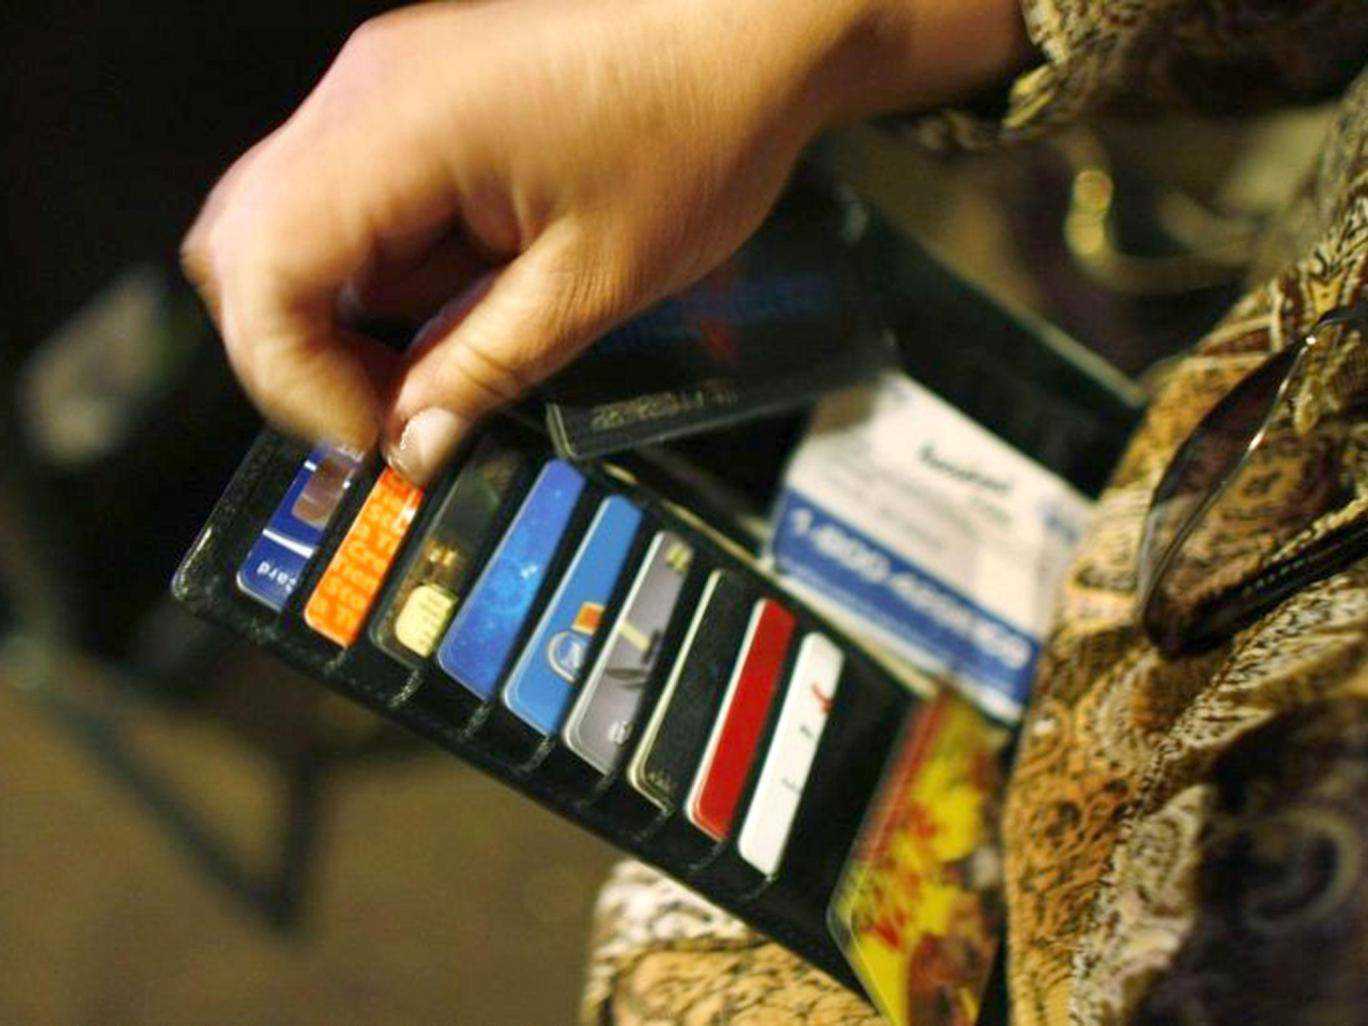 Businesses brace for credit card fee ban starting this weekend